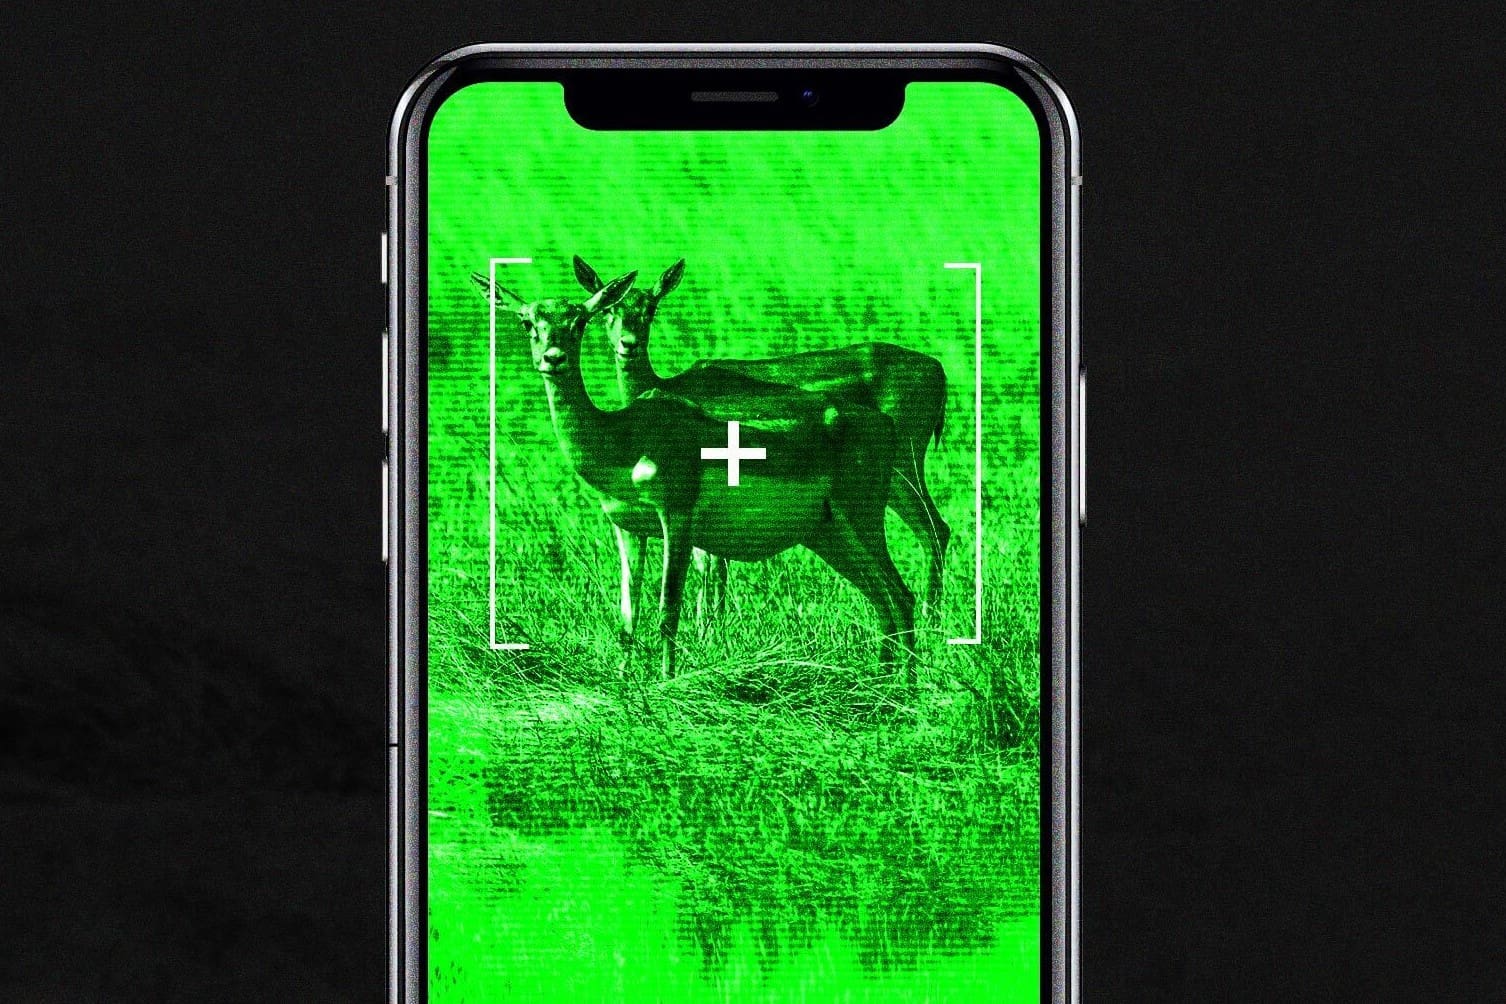 What Is The Best Night Vision Camera App For A Google Phone